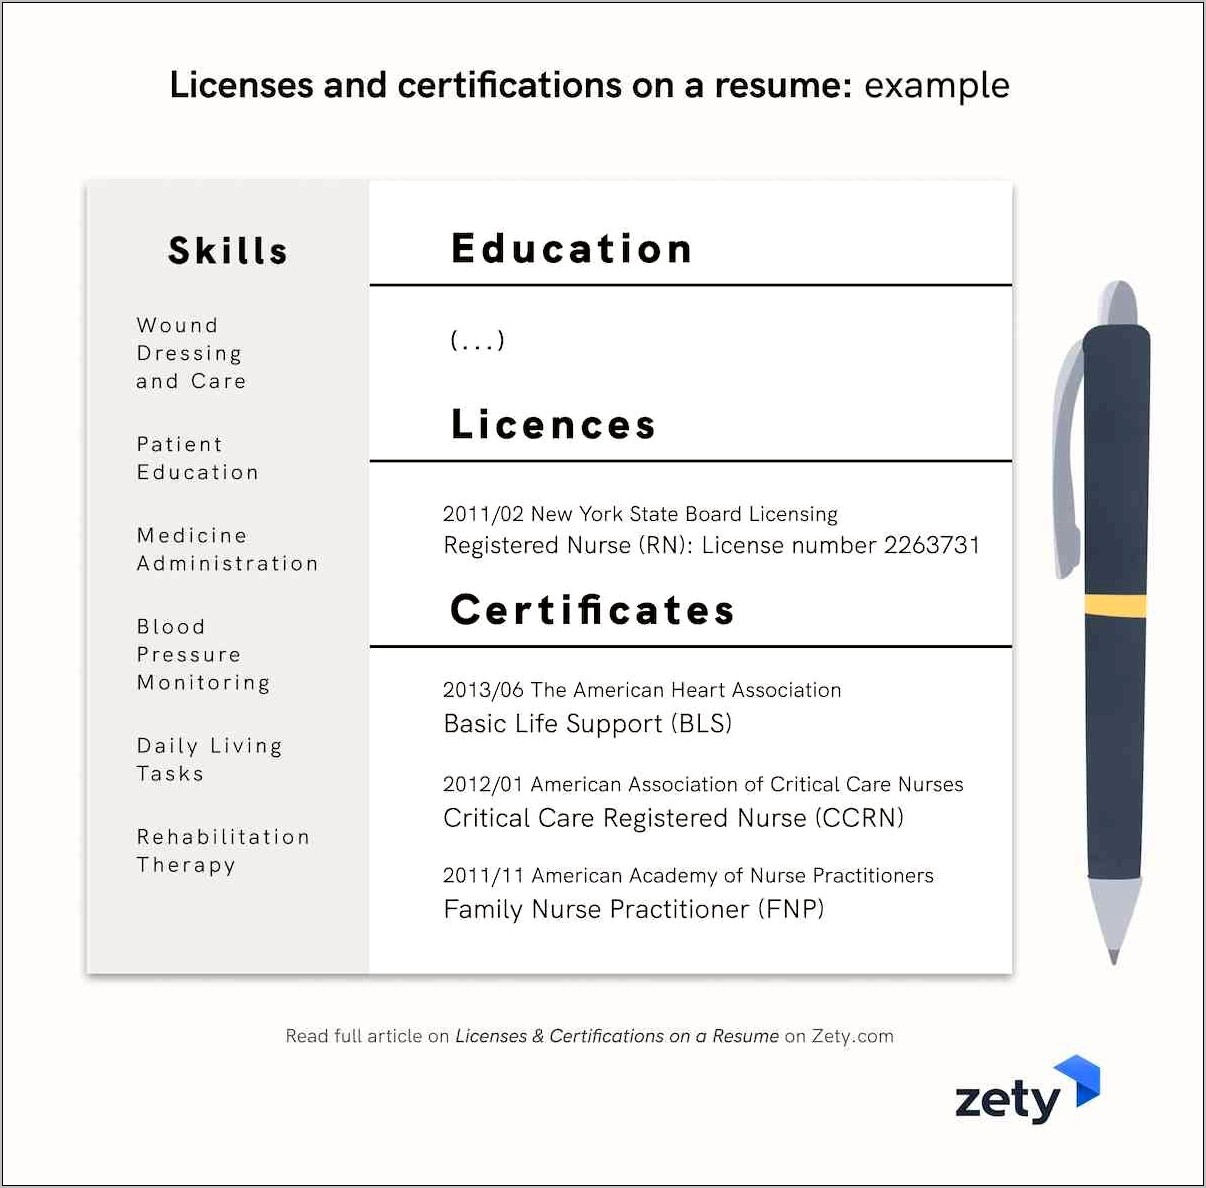 Free Certification Courses For Resume